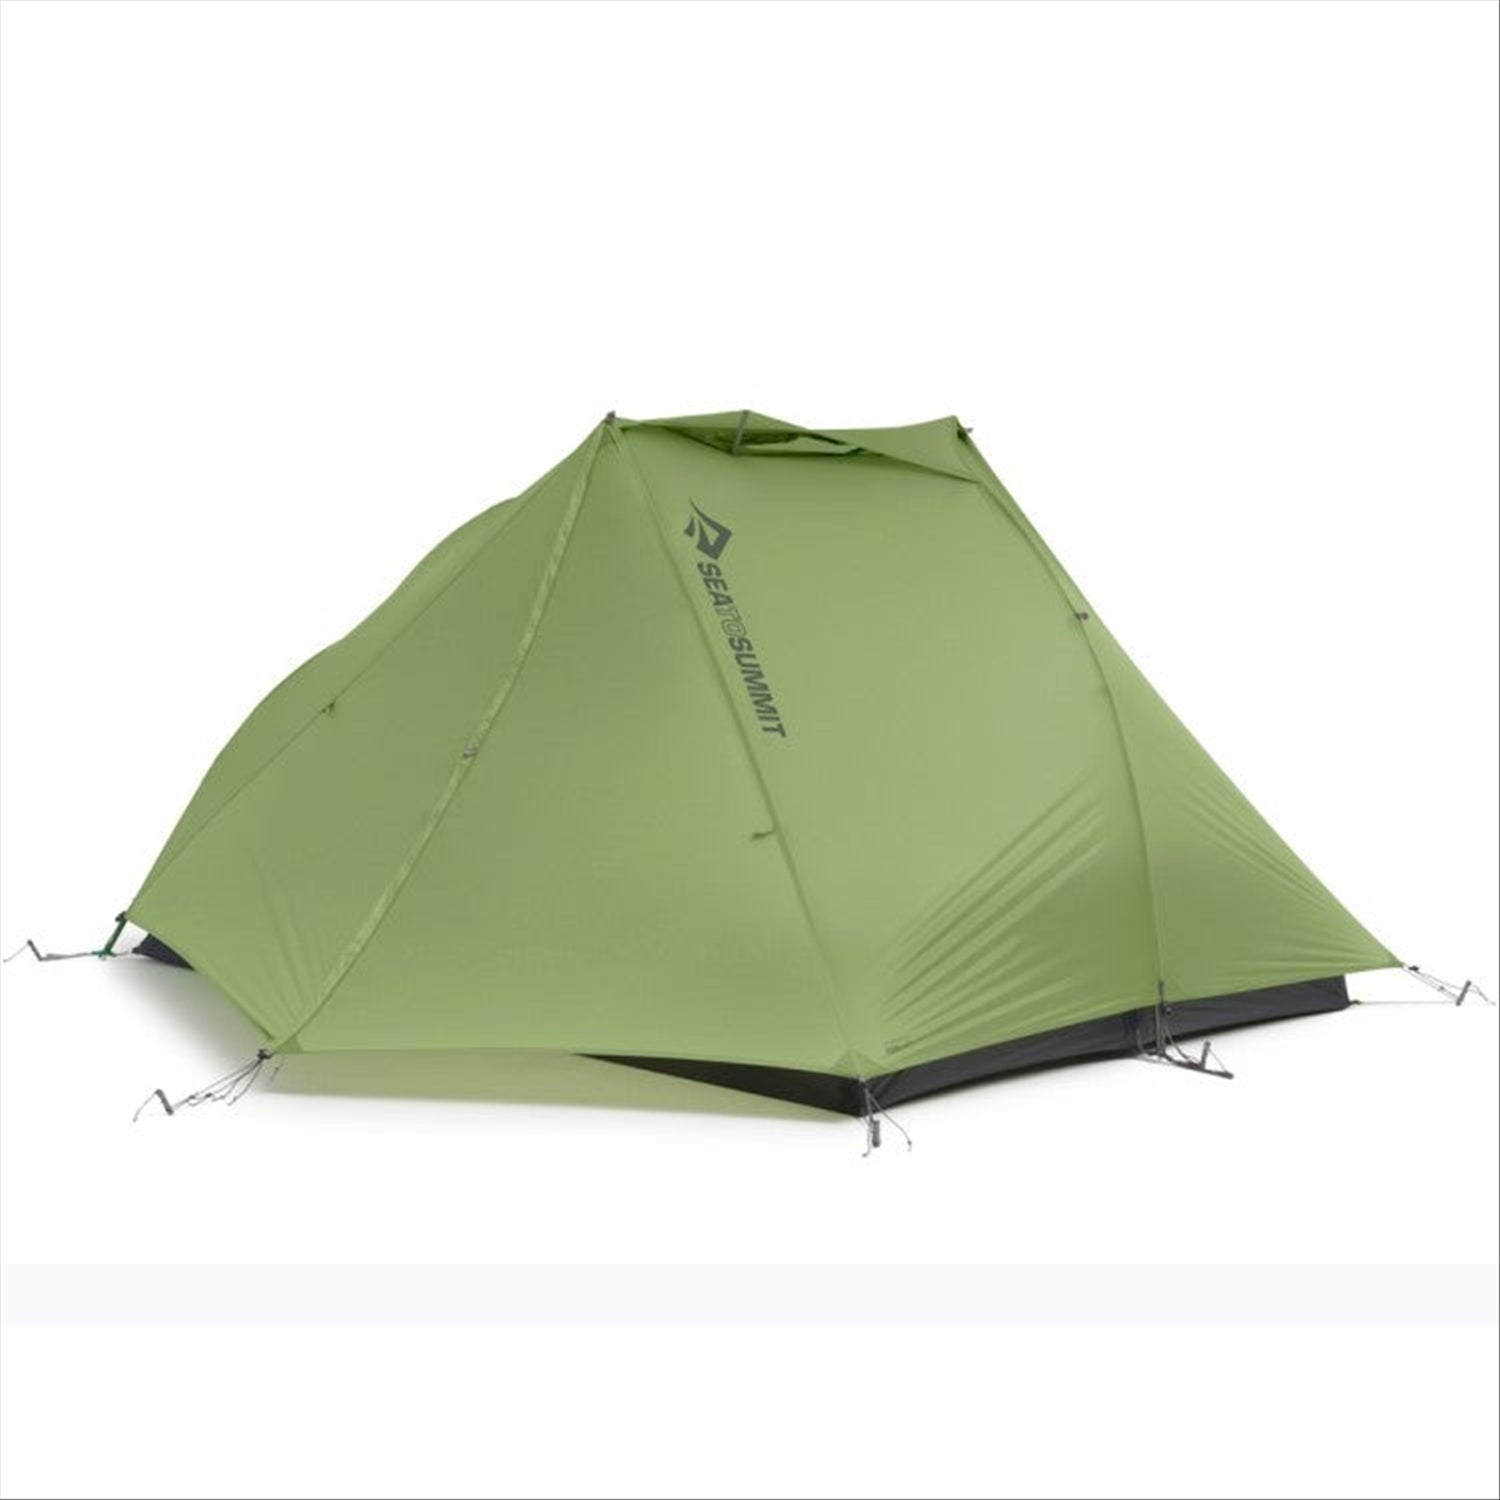 Sea To Summit Alto TR2 PLUS Ultralite 2 person Backpacking Tent 1.48kg